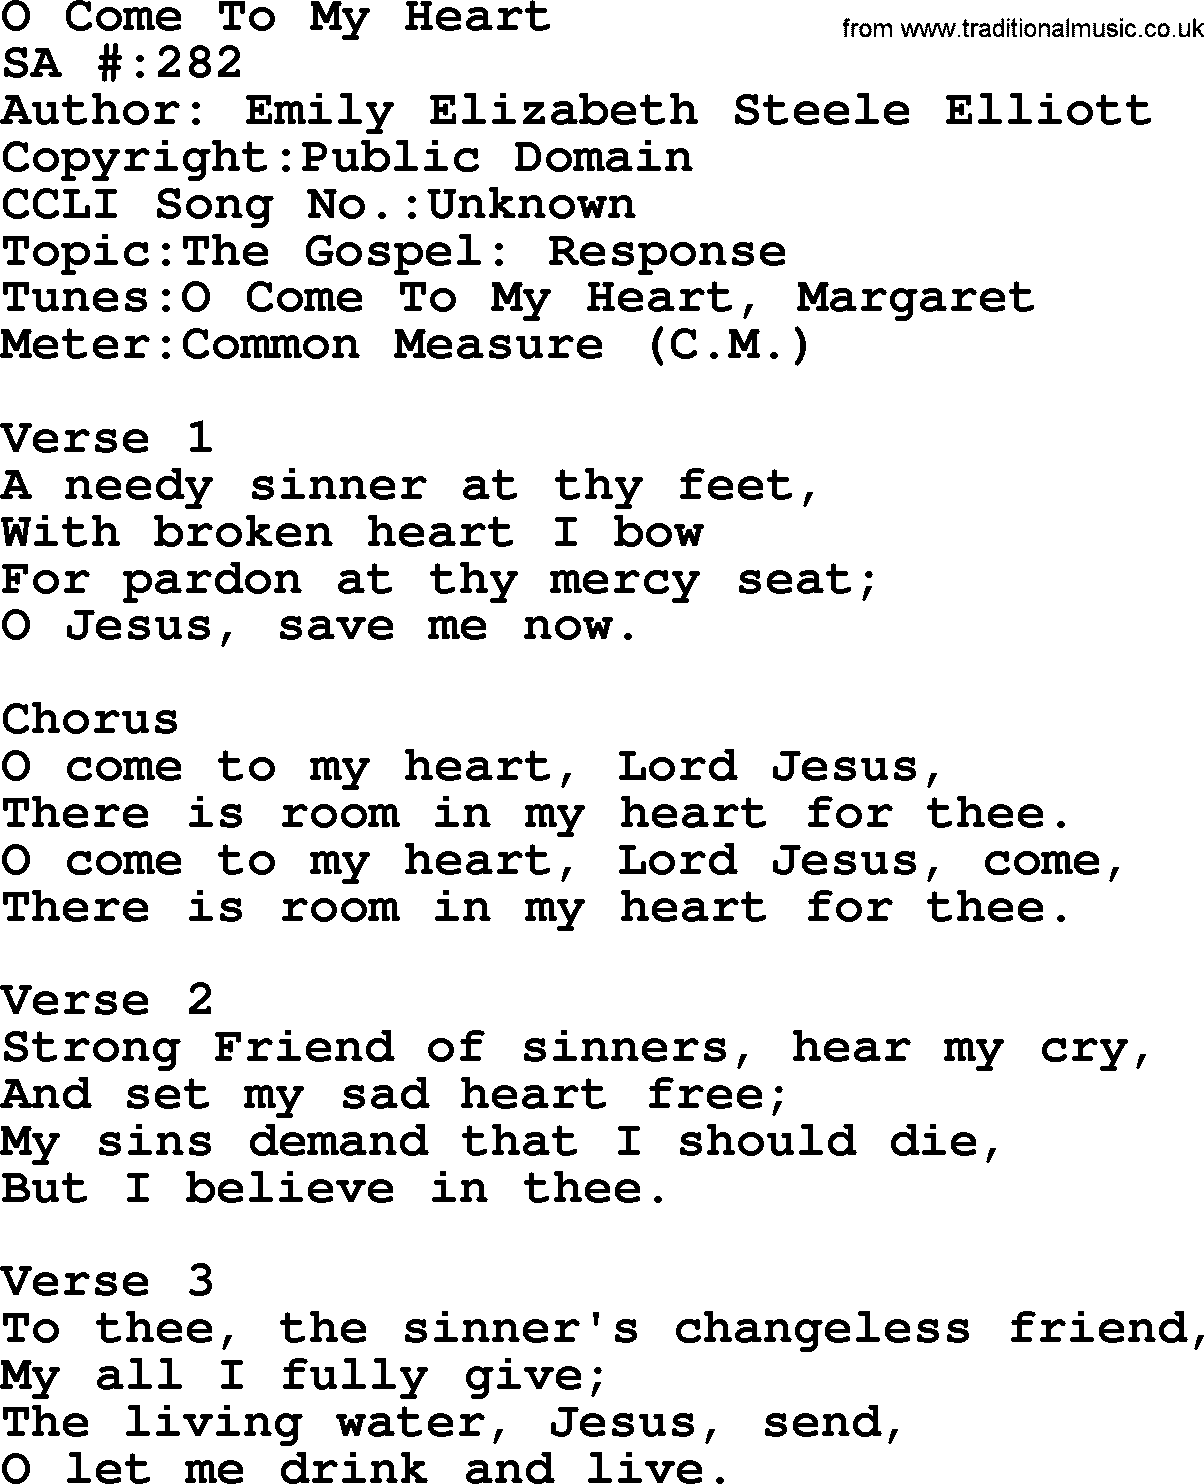 Salvation Army Hymnal, title: O Come To My Heart, with lyrics and PDF,